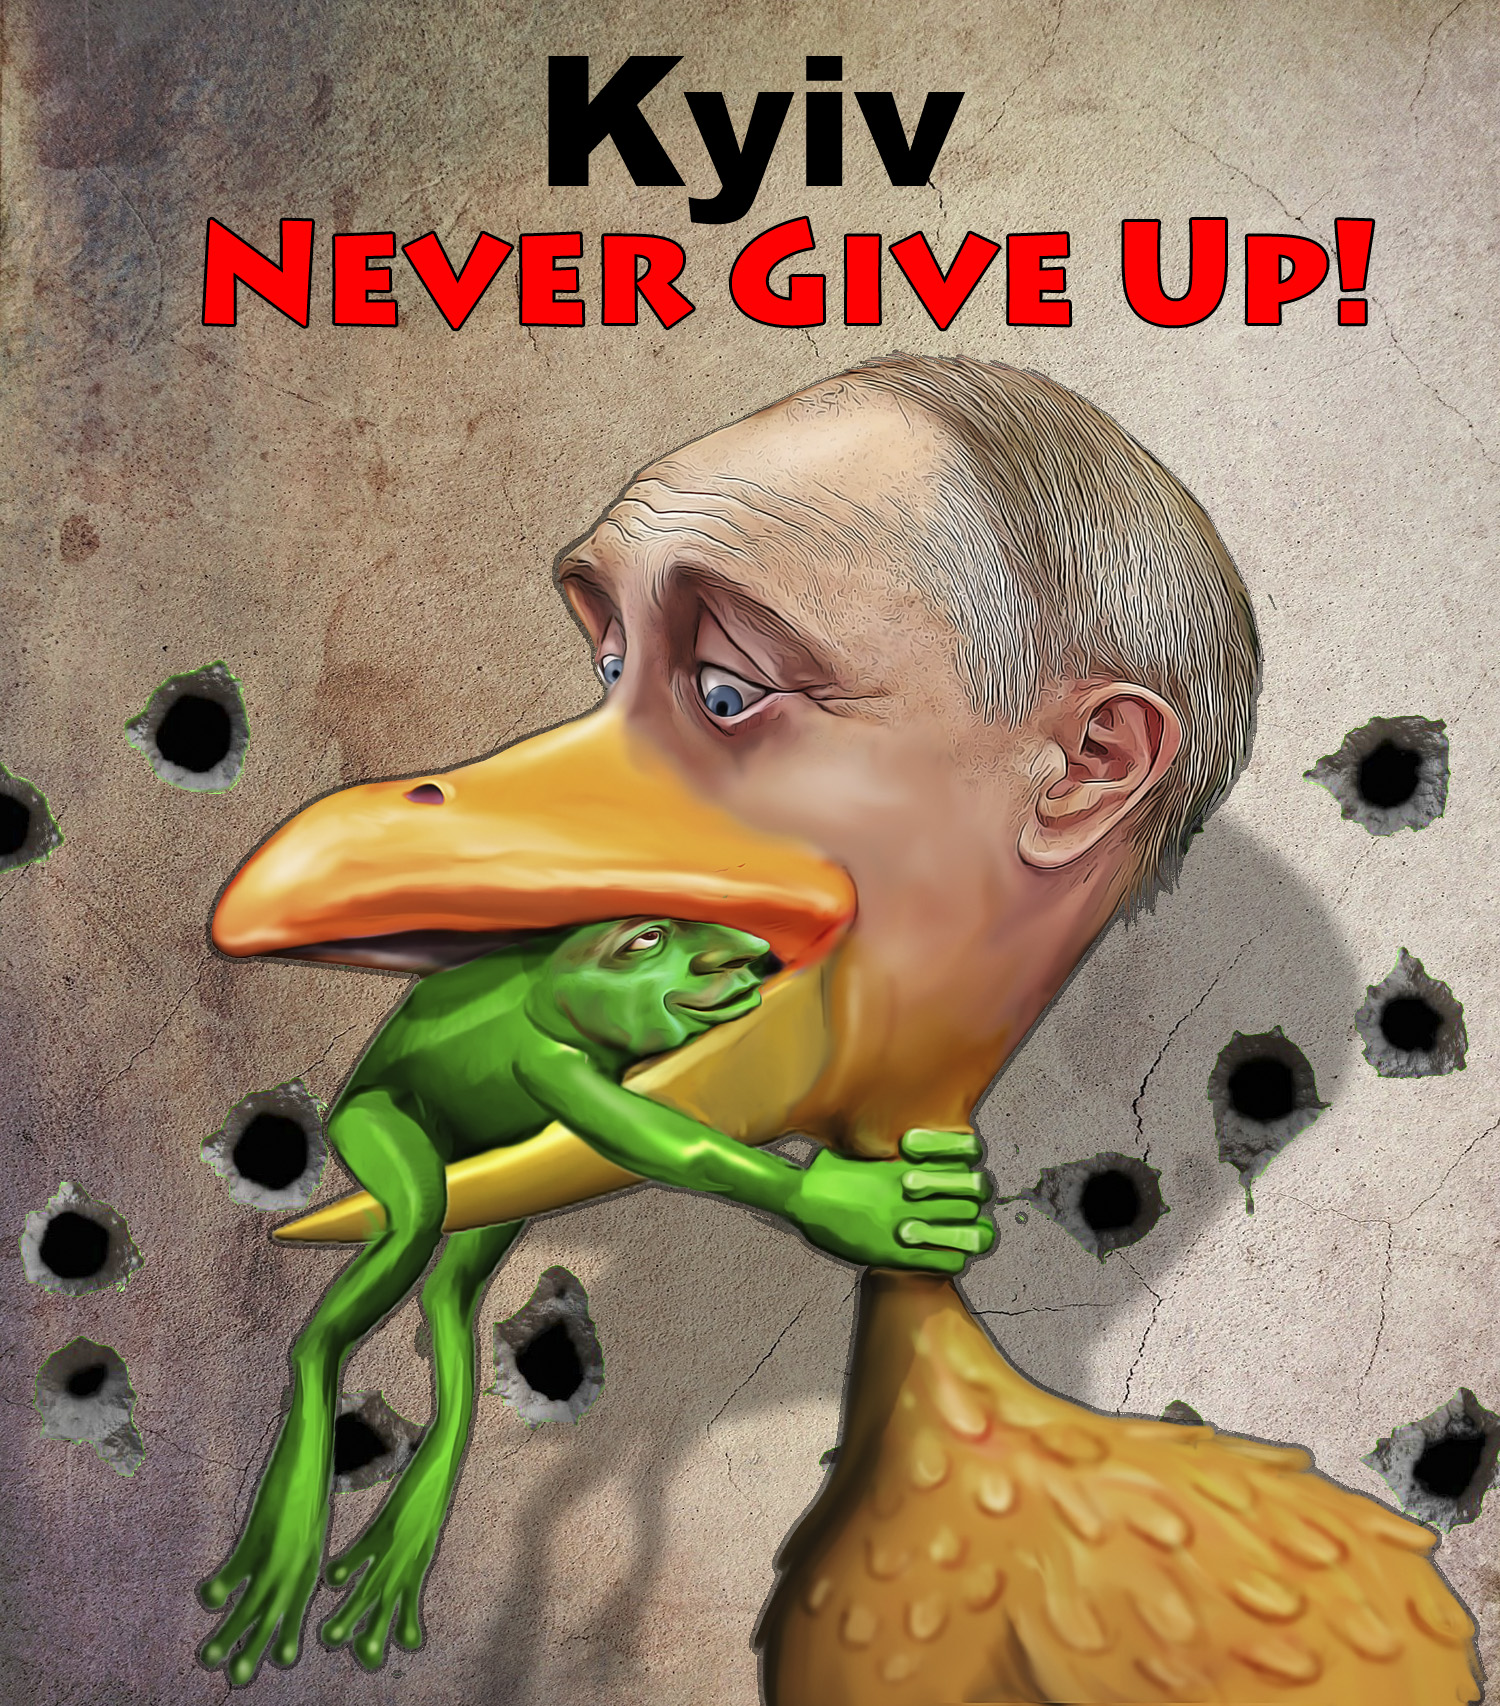 Kyiv Never Give Up!